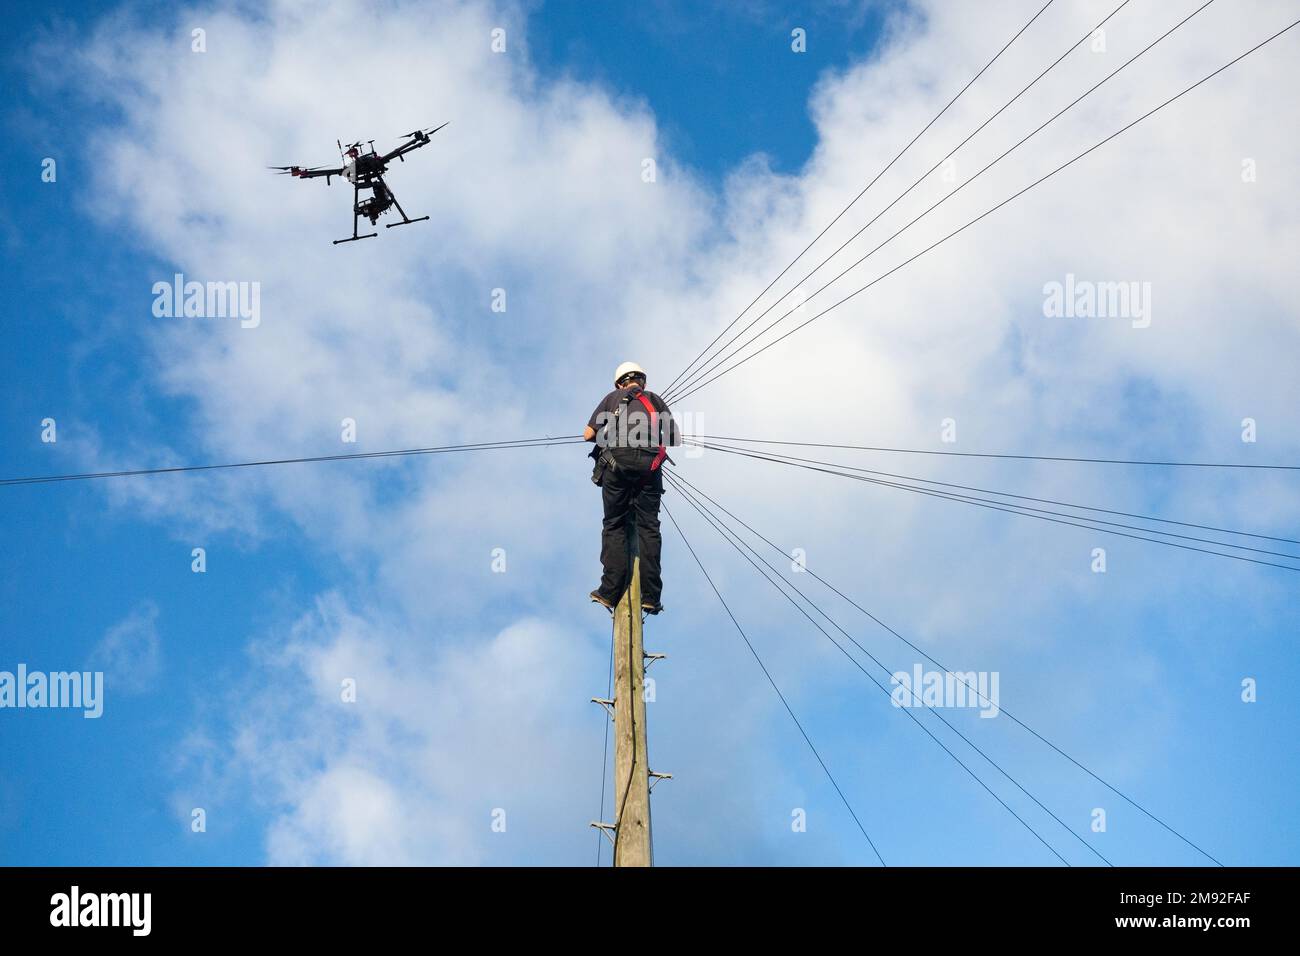 Telecommunications,Telecom engineer working up telegraph pole with drone flying above. Drone technology, Broadband, 5g, internet...concept. UK Stock Photo